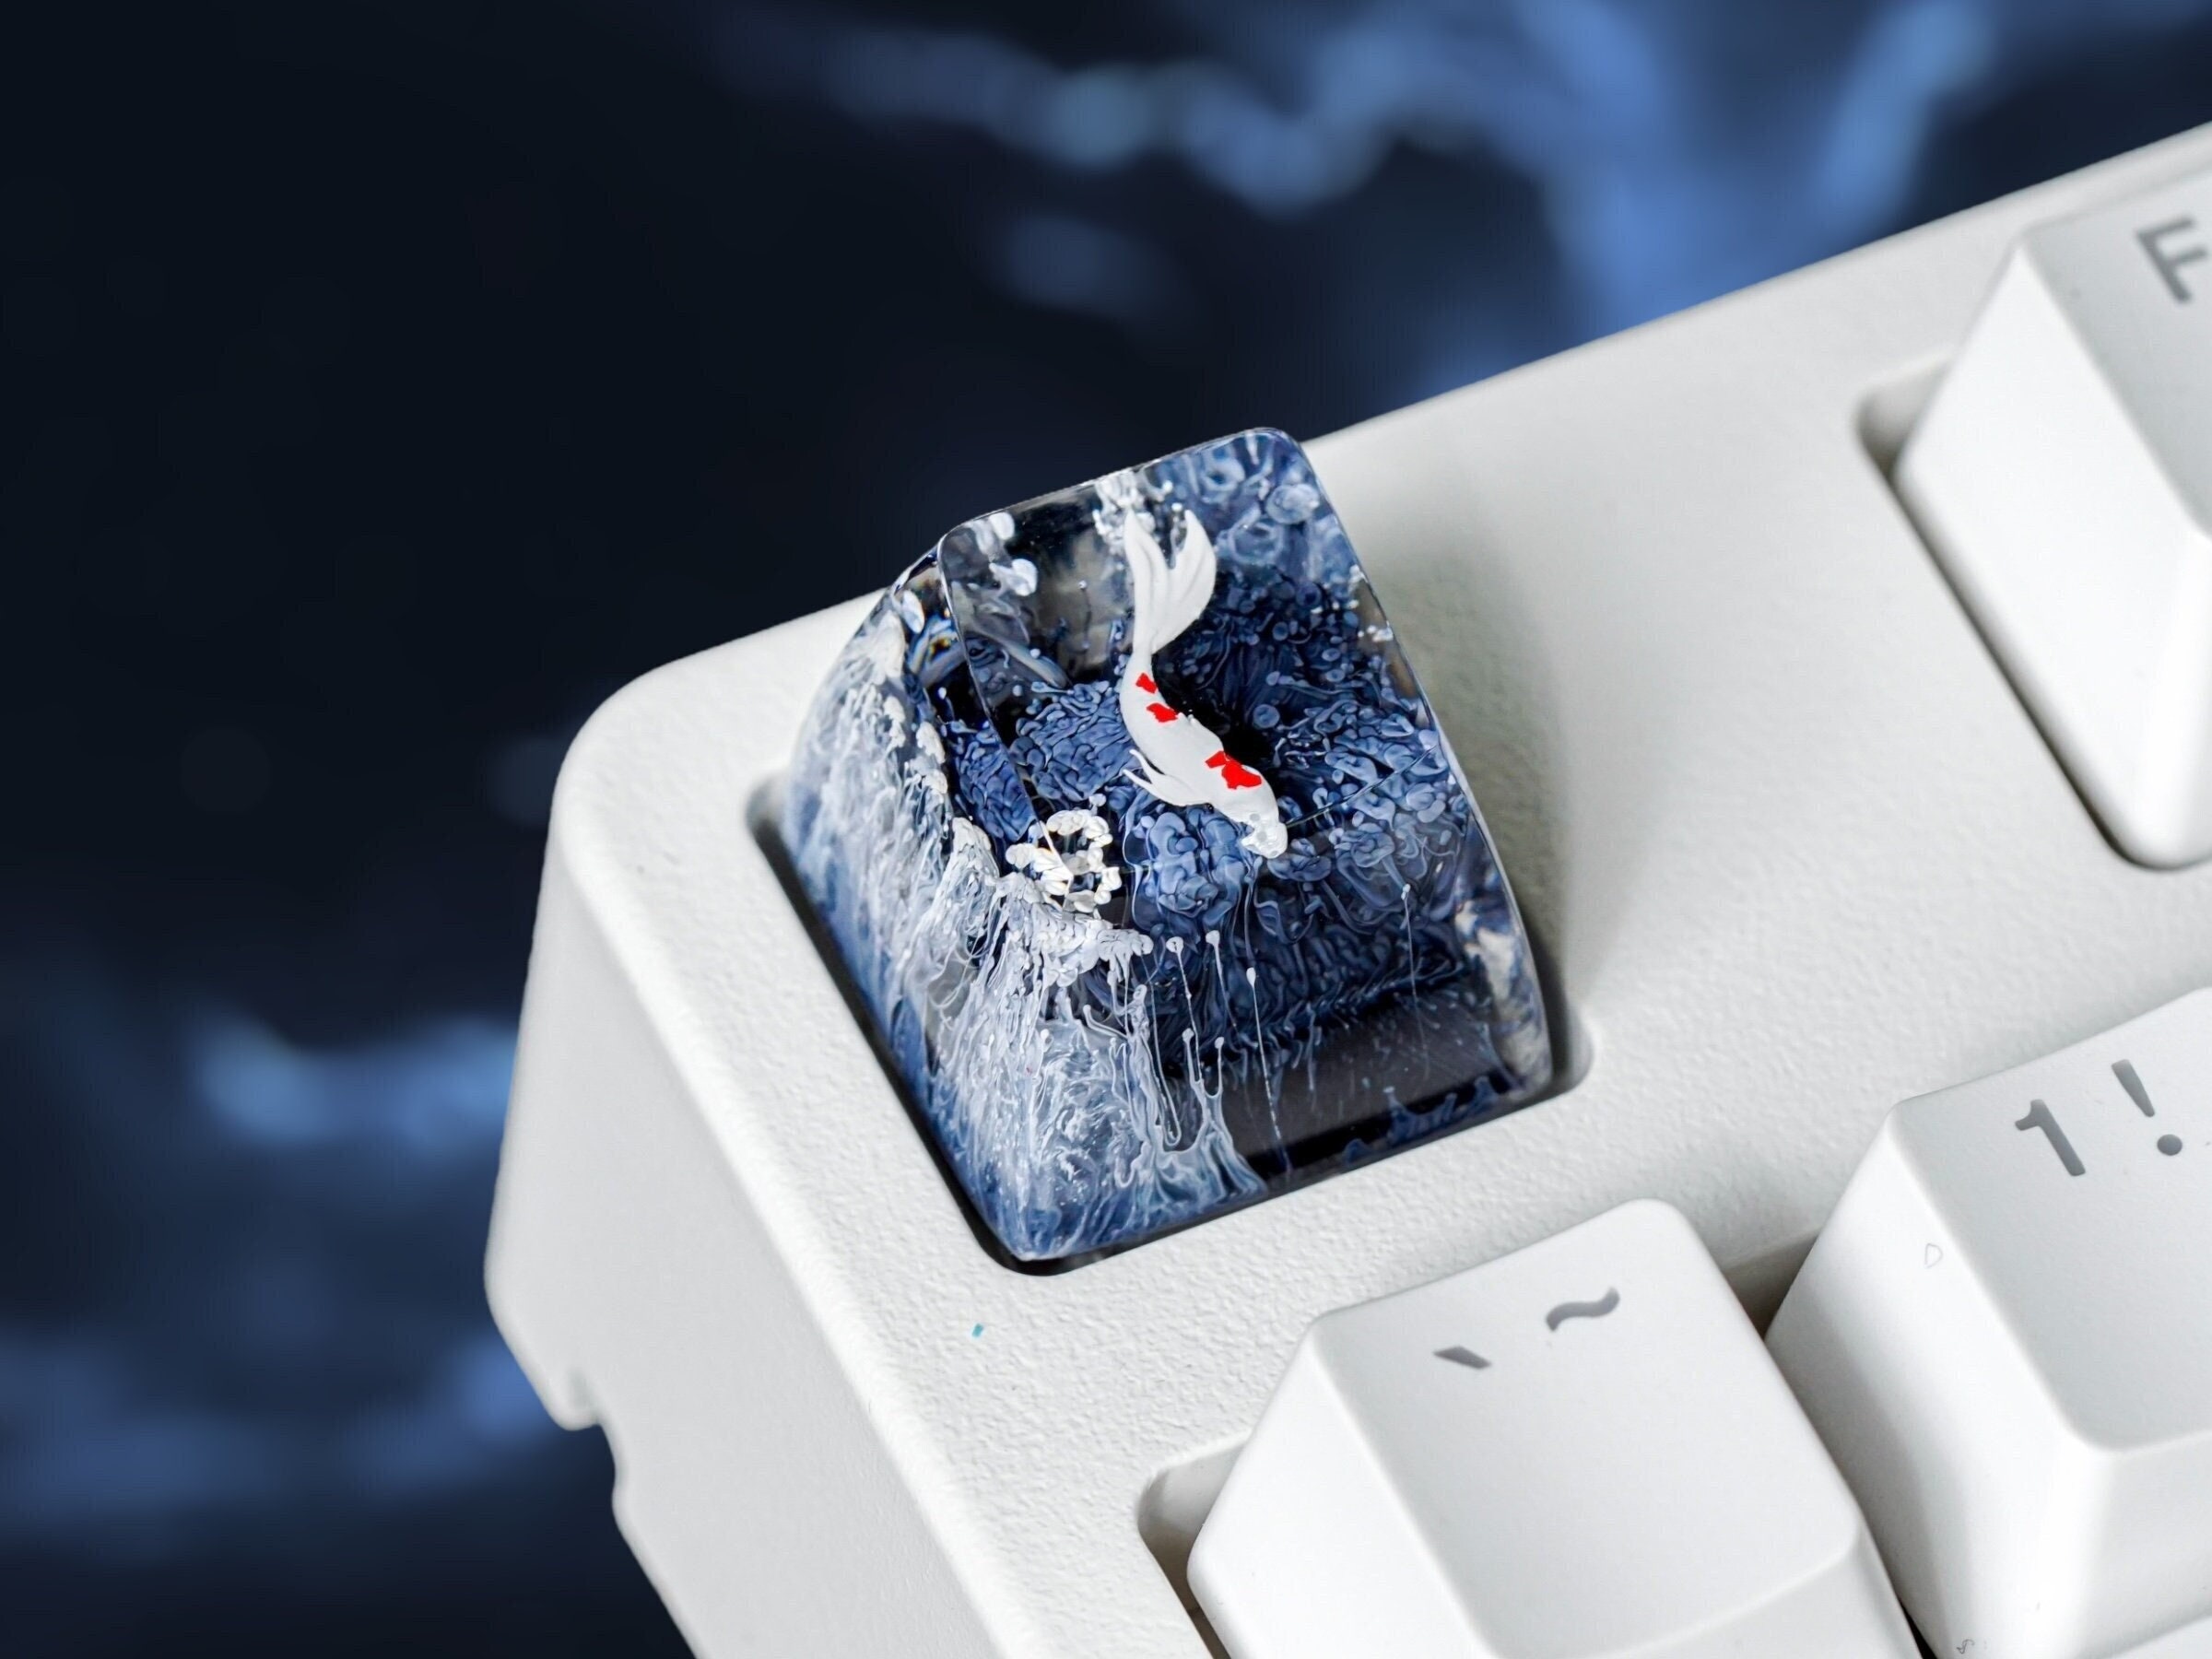 Koi Fish Keycap, Artisan Keycap, White & Black Coral, Keycap for Mx Cherry Switches Mechanical Keyboard, Gift for Him